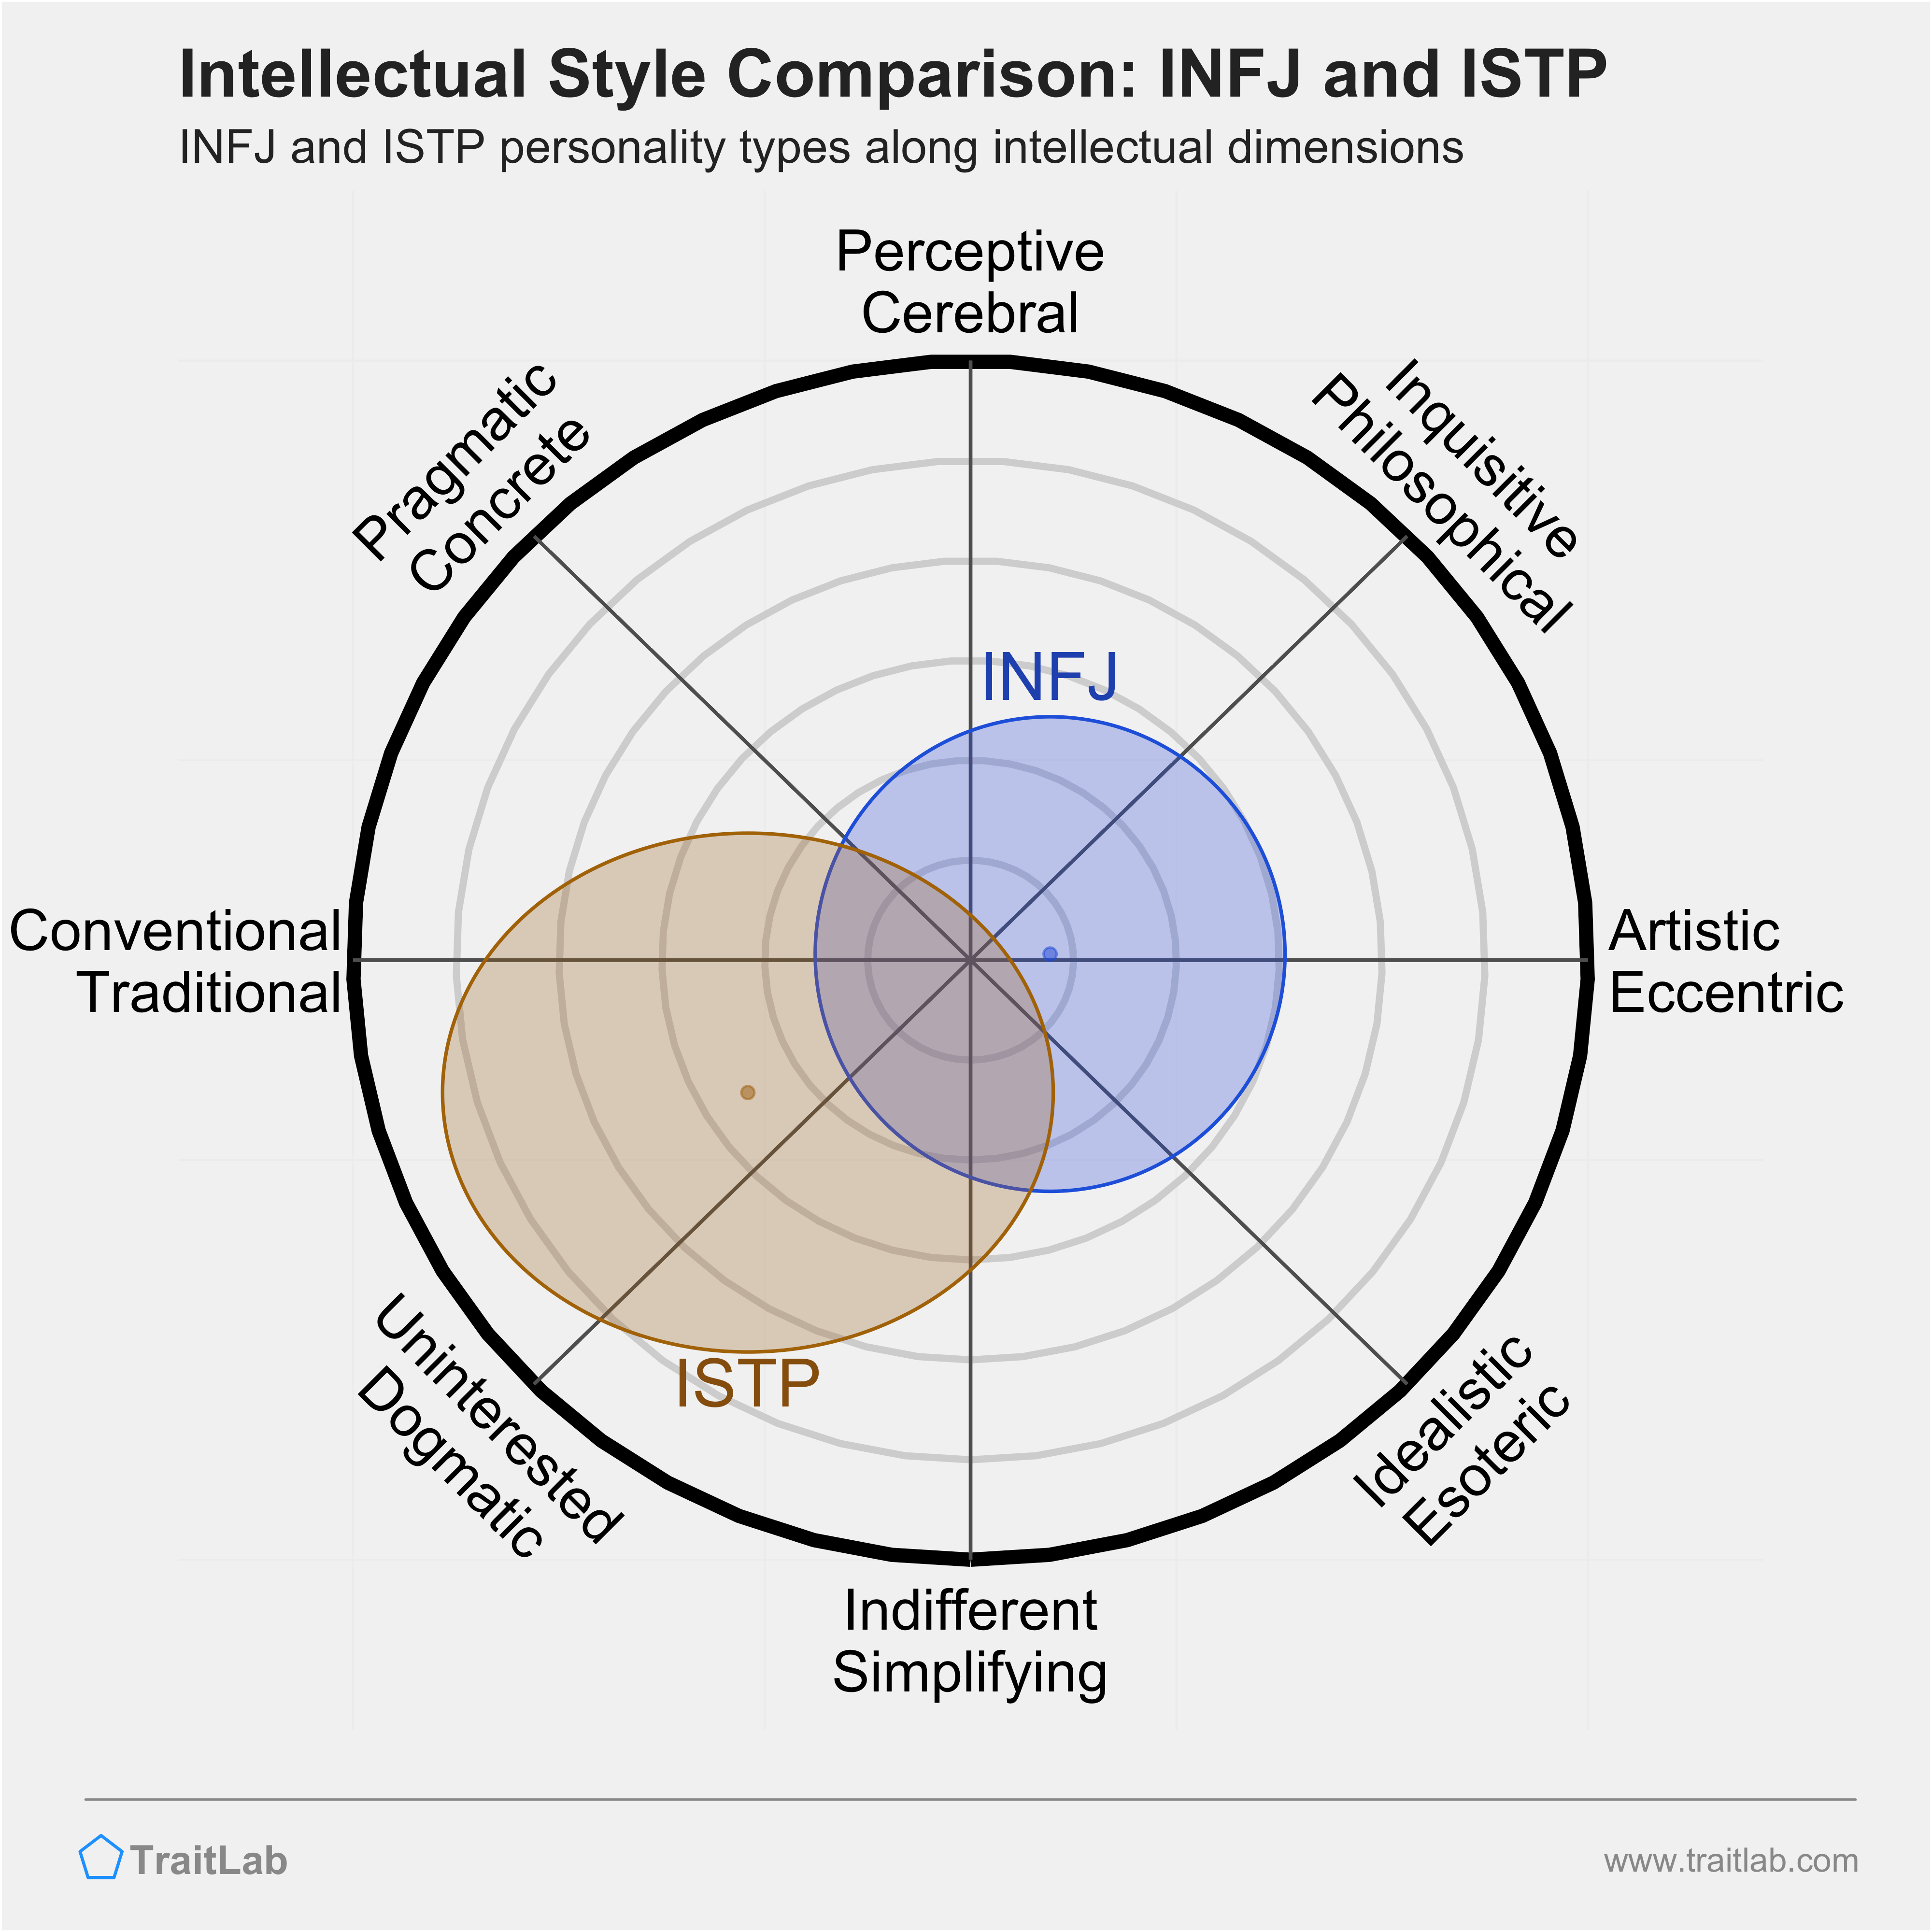 INFJ and ISTP comparison across intellectual dimensions